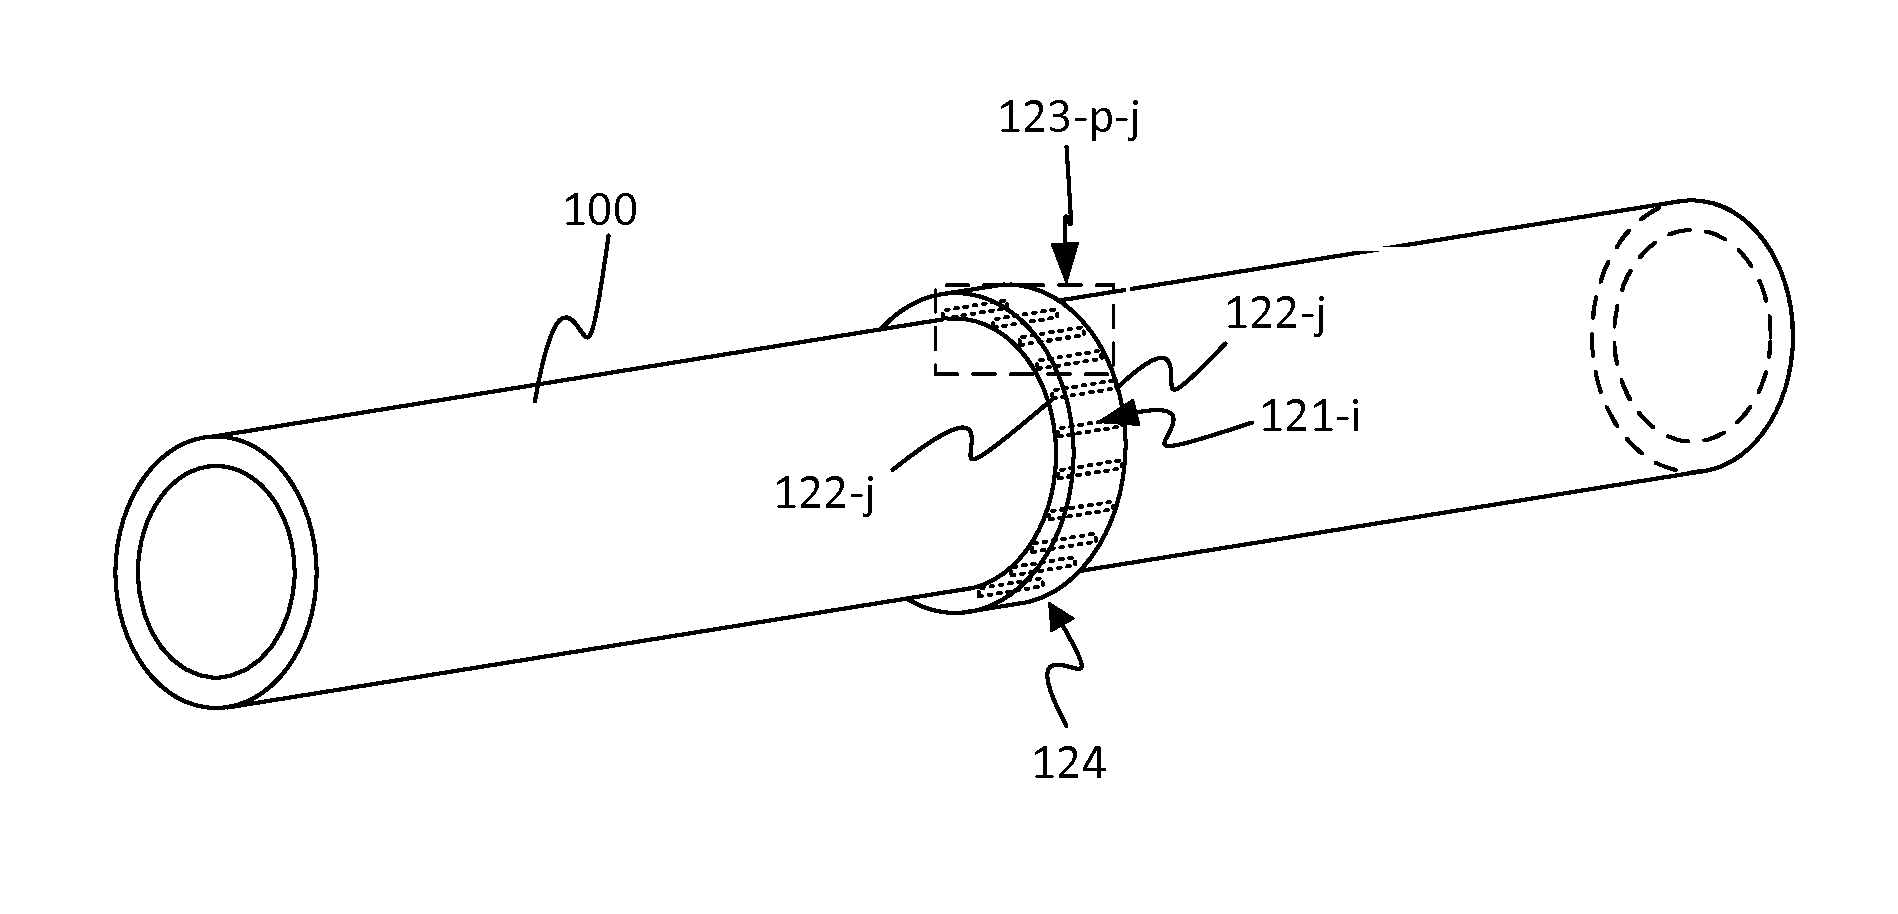 Method of conducting probe coupling calibration in a guided-wave inspection instrument